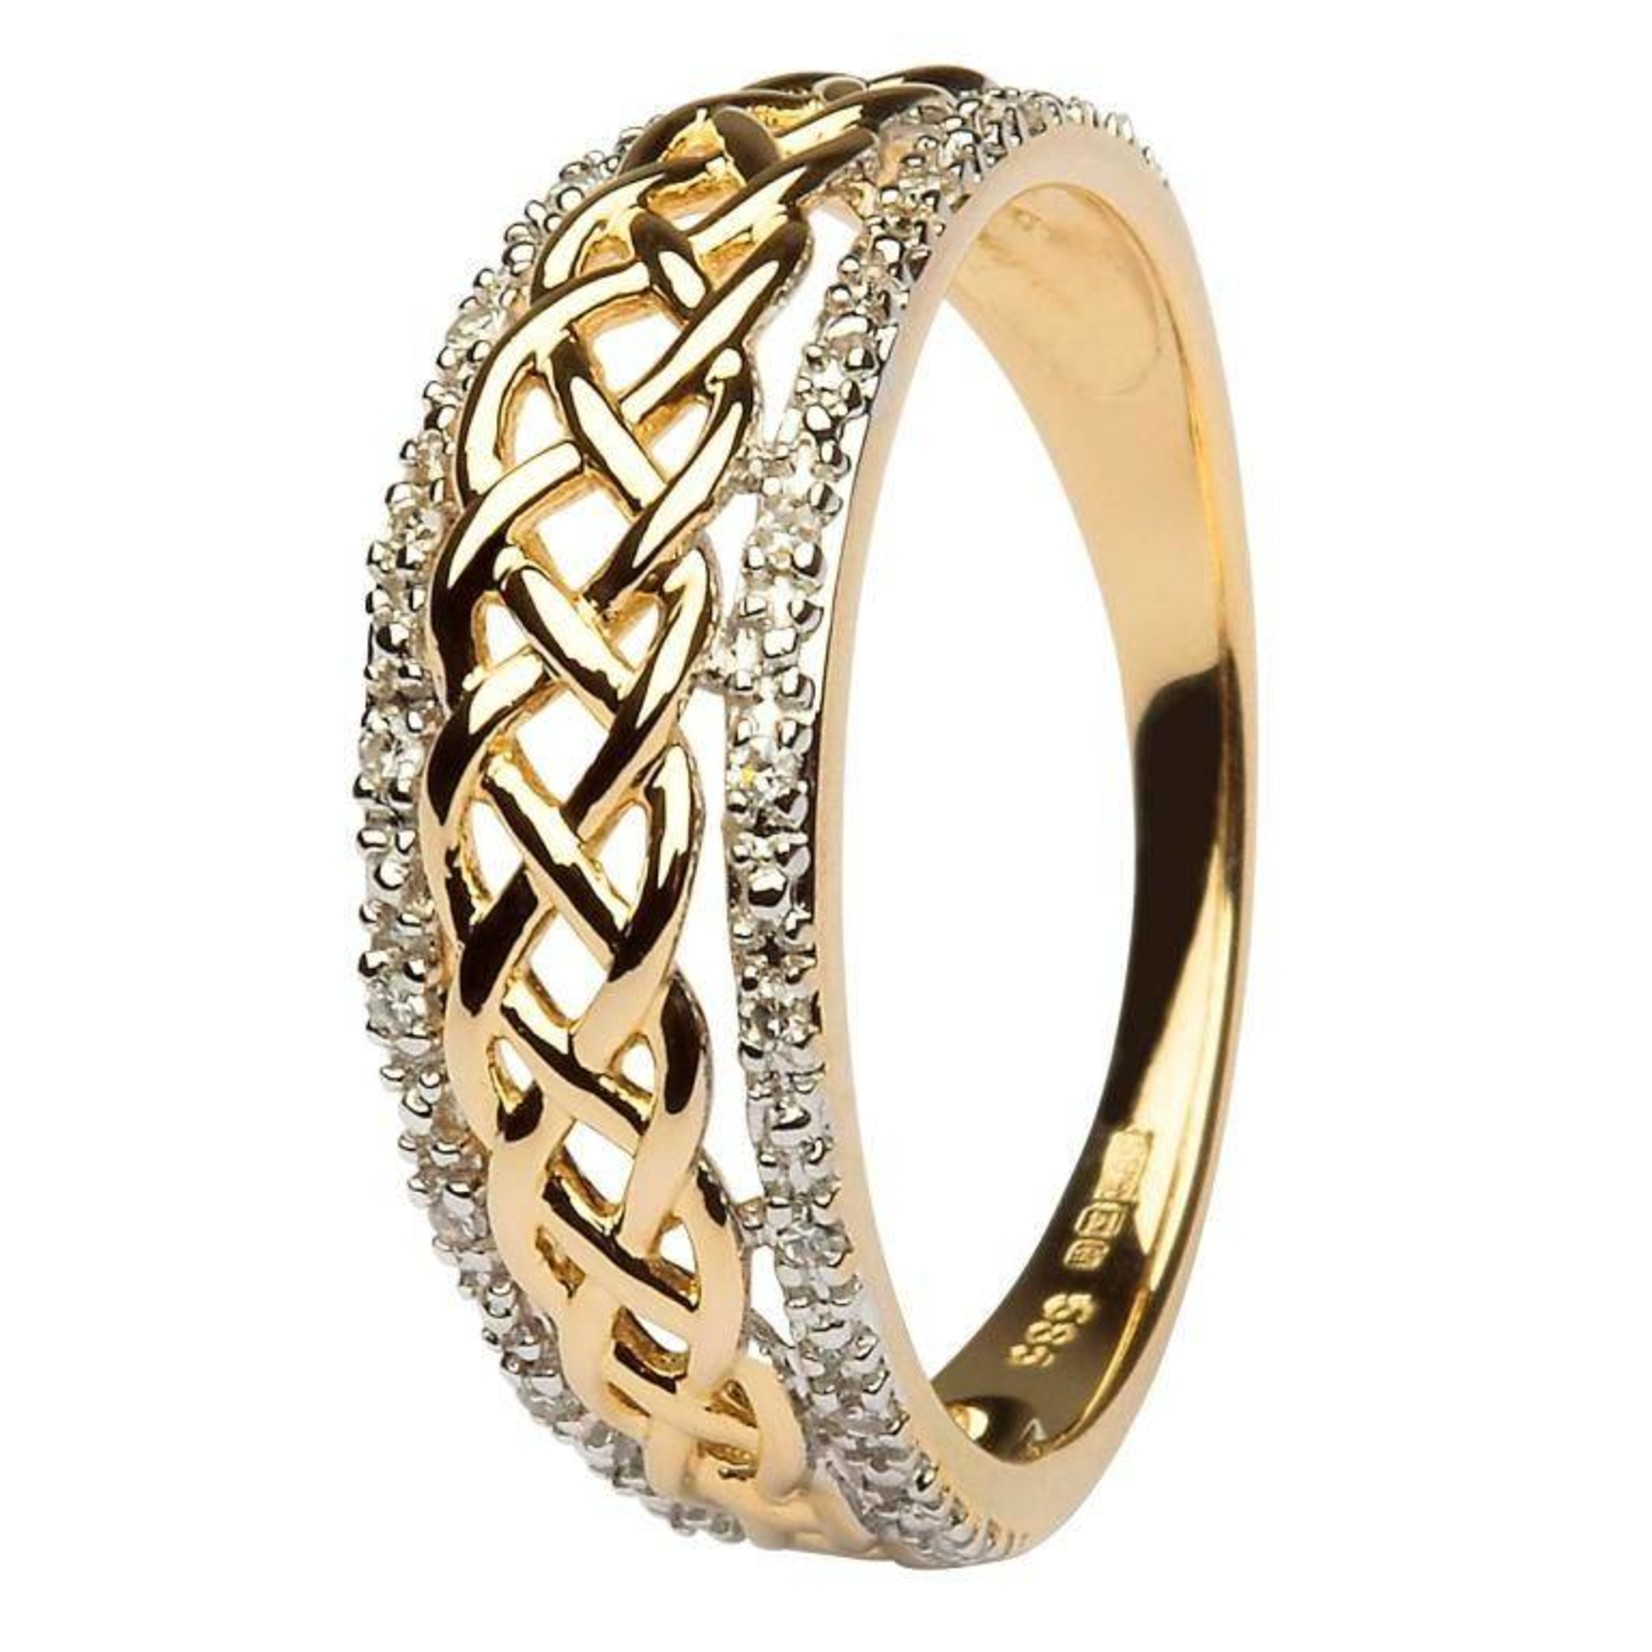 Shanore 14k Yellow Gold Celtic Knot Diamond Ring